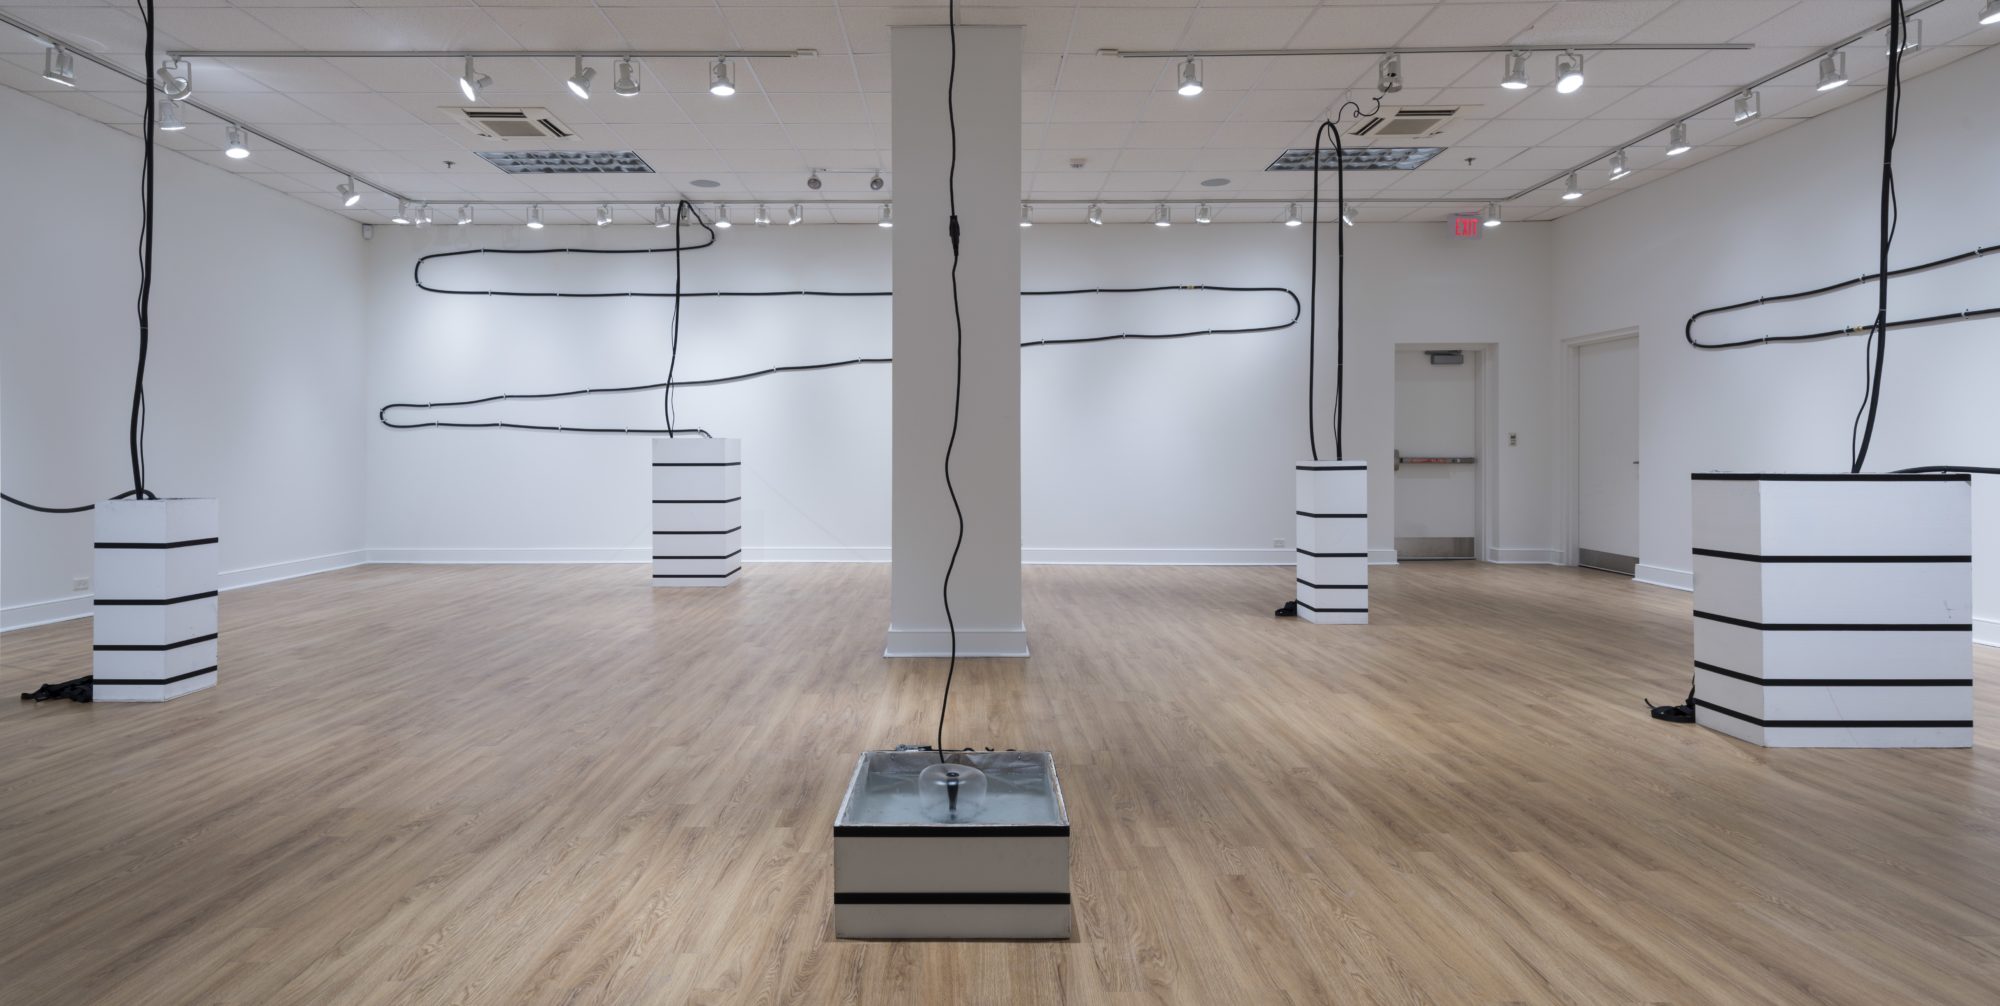 Several black and white sculptural installations featuring wires by Virginia Overton are shown in a large gallery space with white walls and ceiling and a light-colored wood floor.